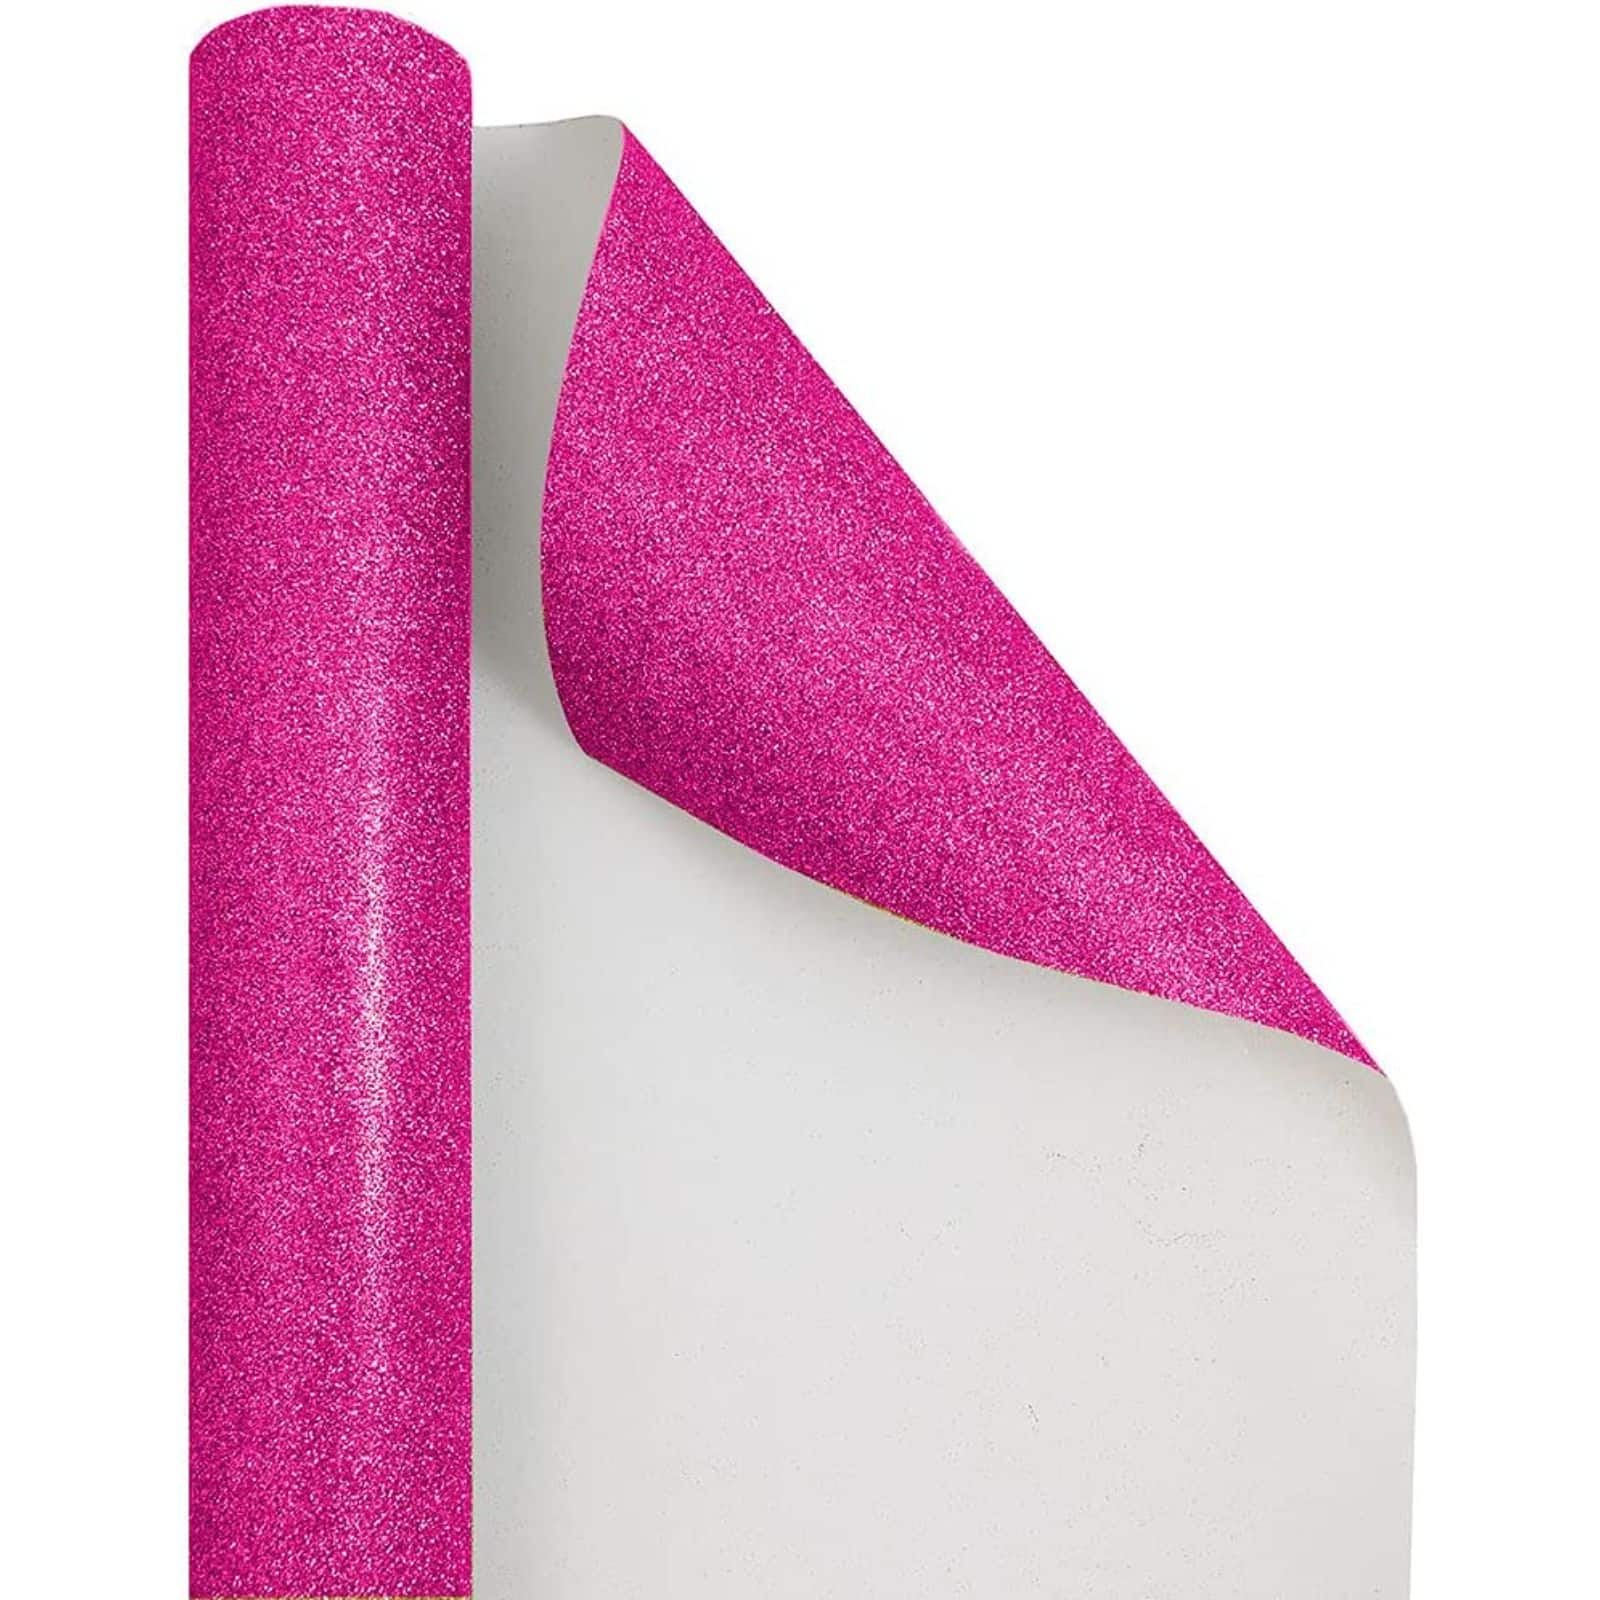 JAM Paper Hot Pink Glitter Gift Wrap, 2ct.